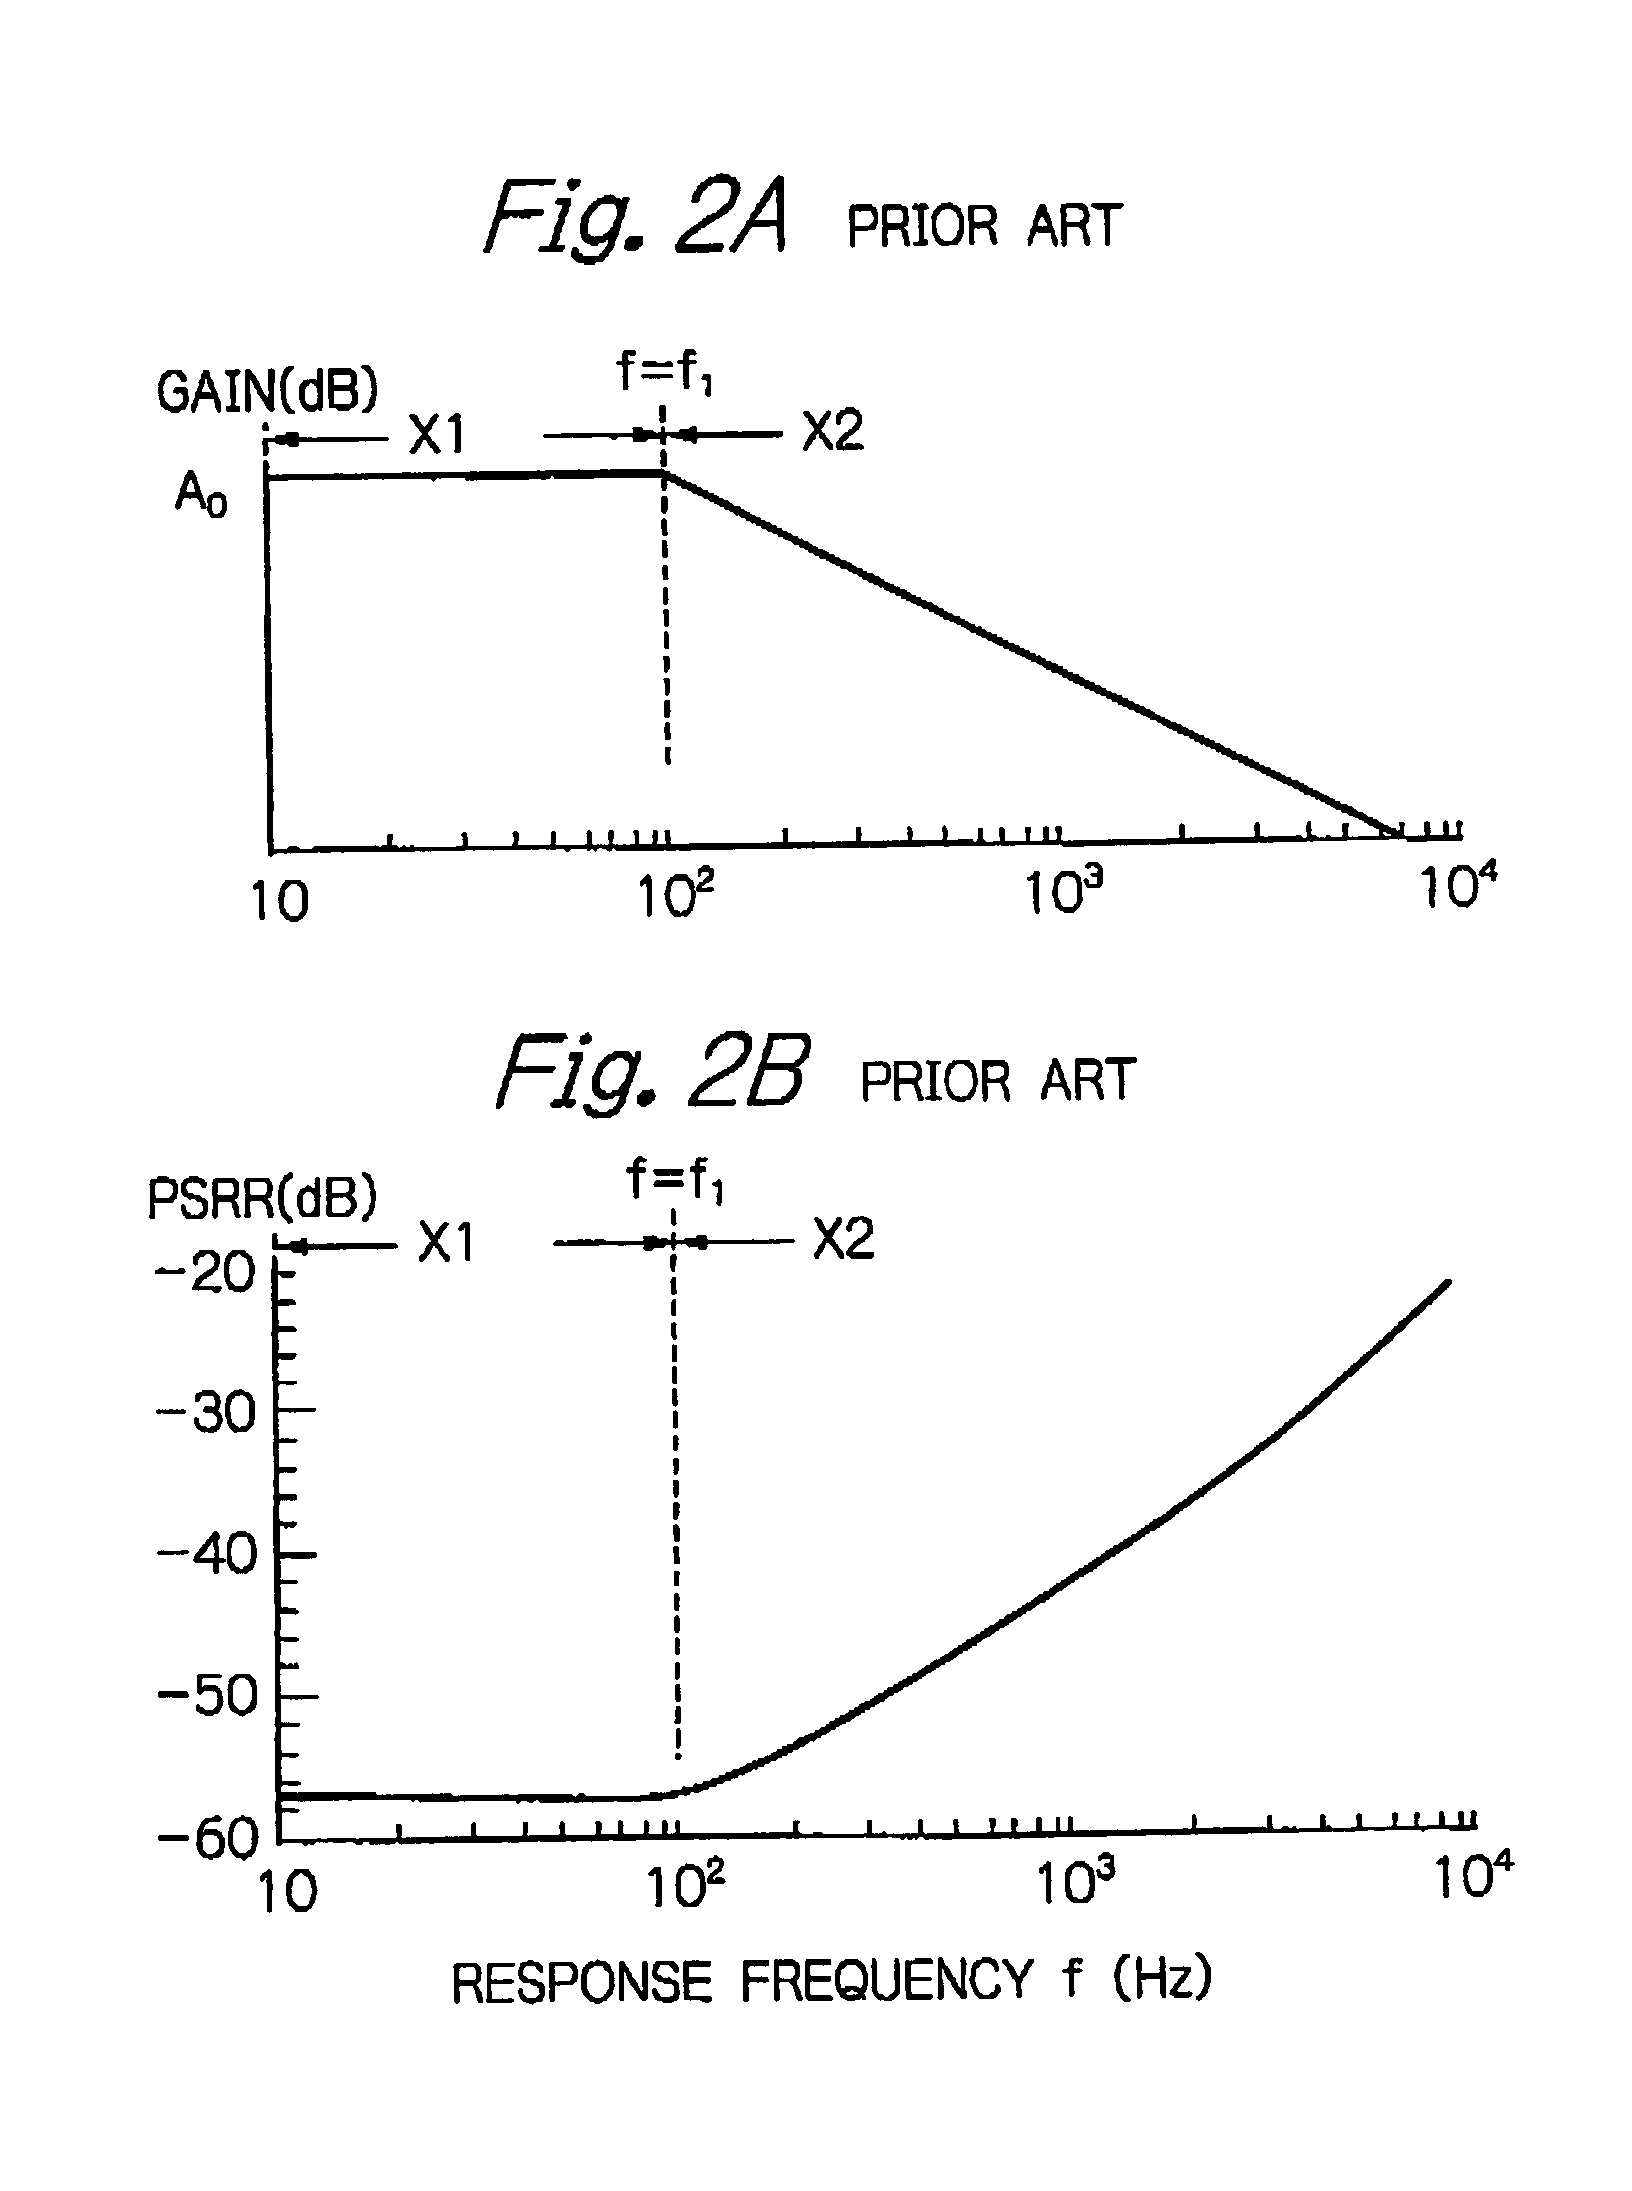 Voltage regulator with improved power supply rejection ratio characteristics and narrow response band